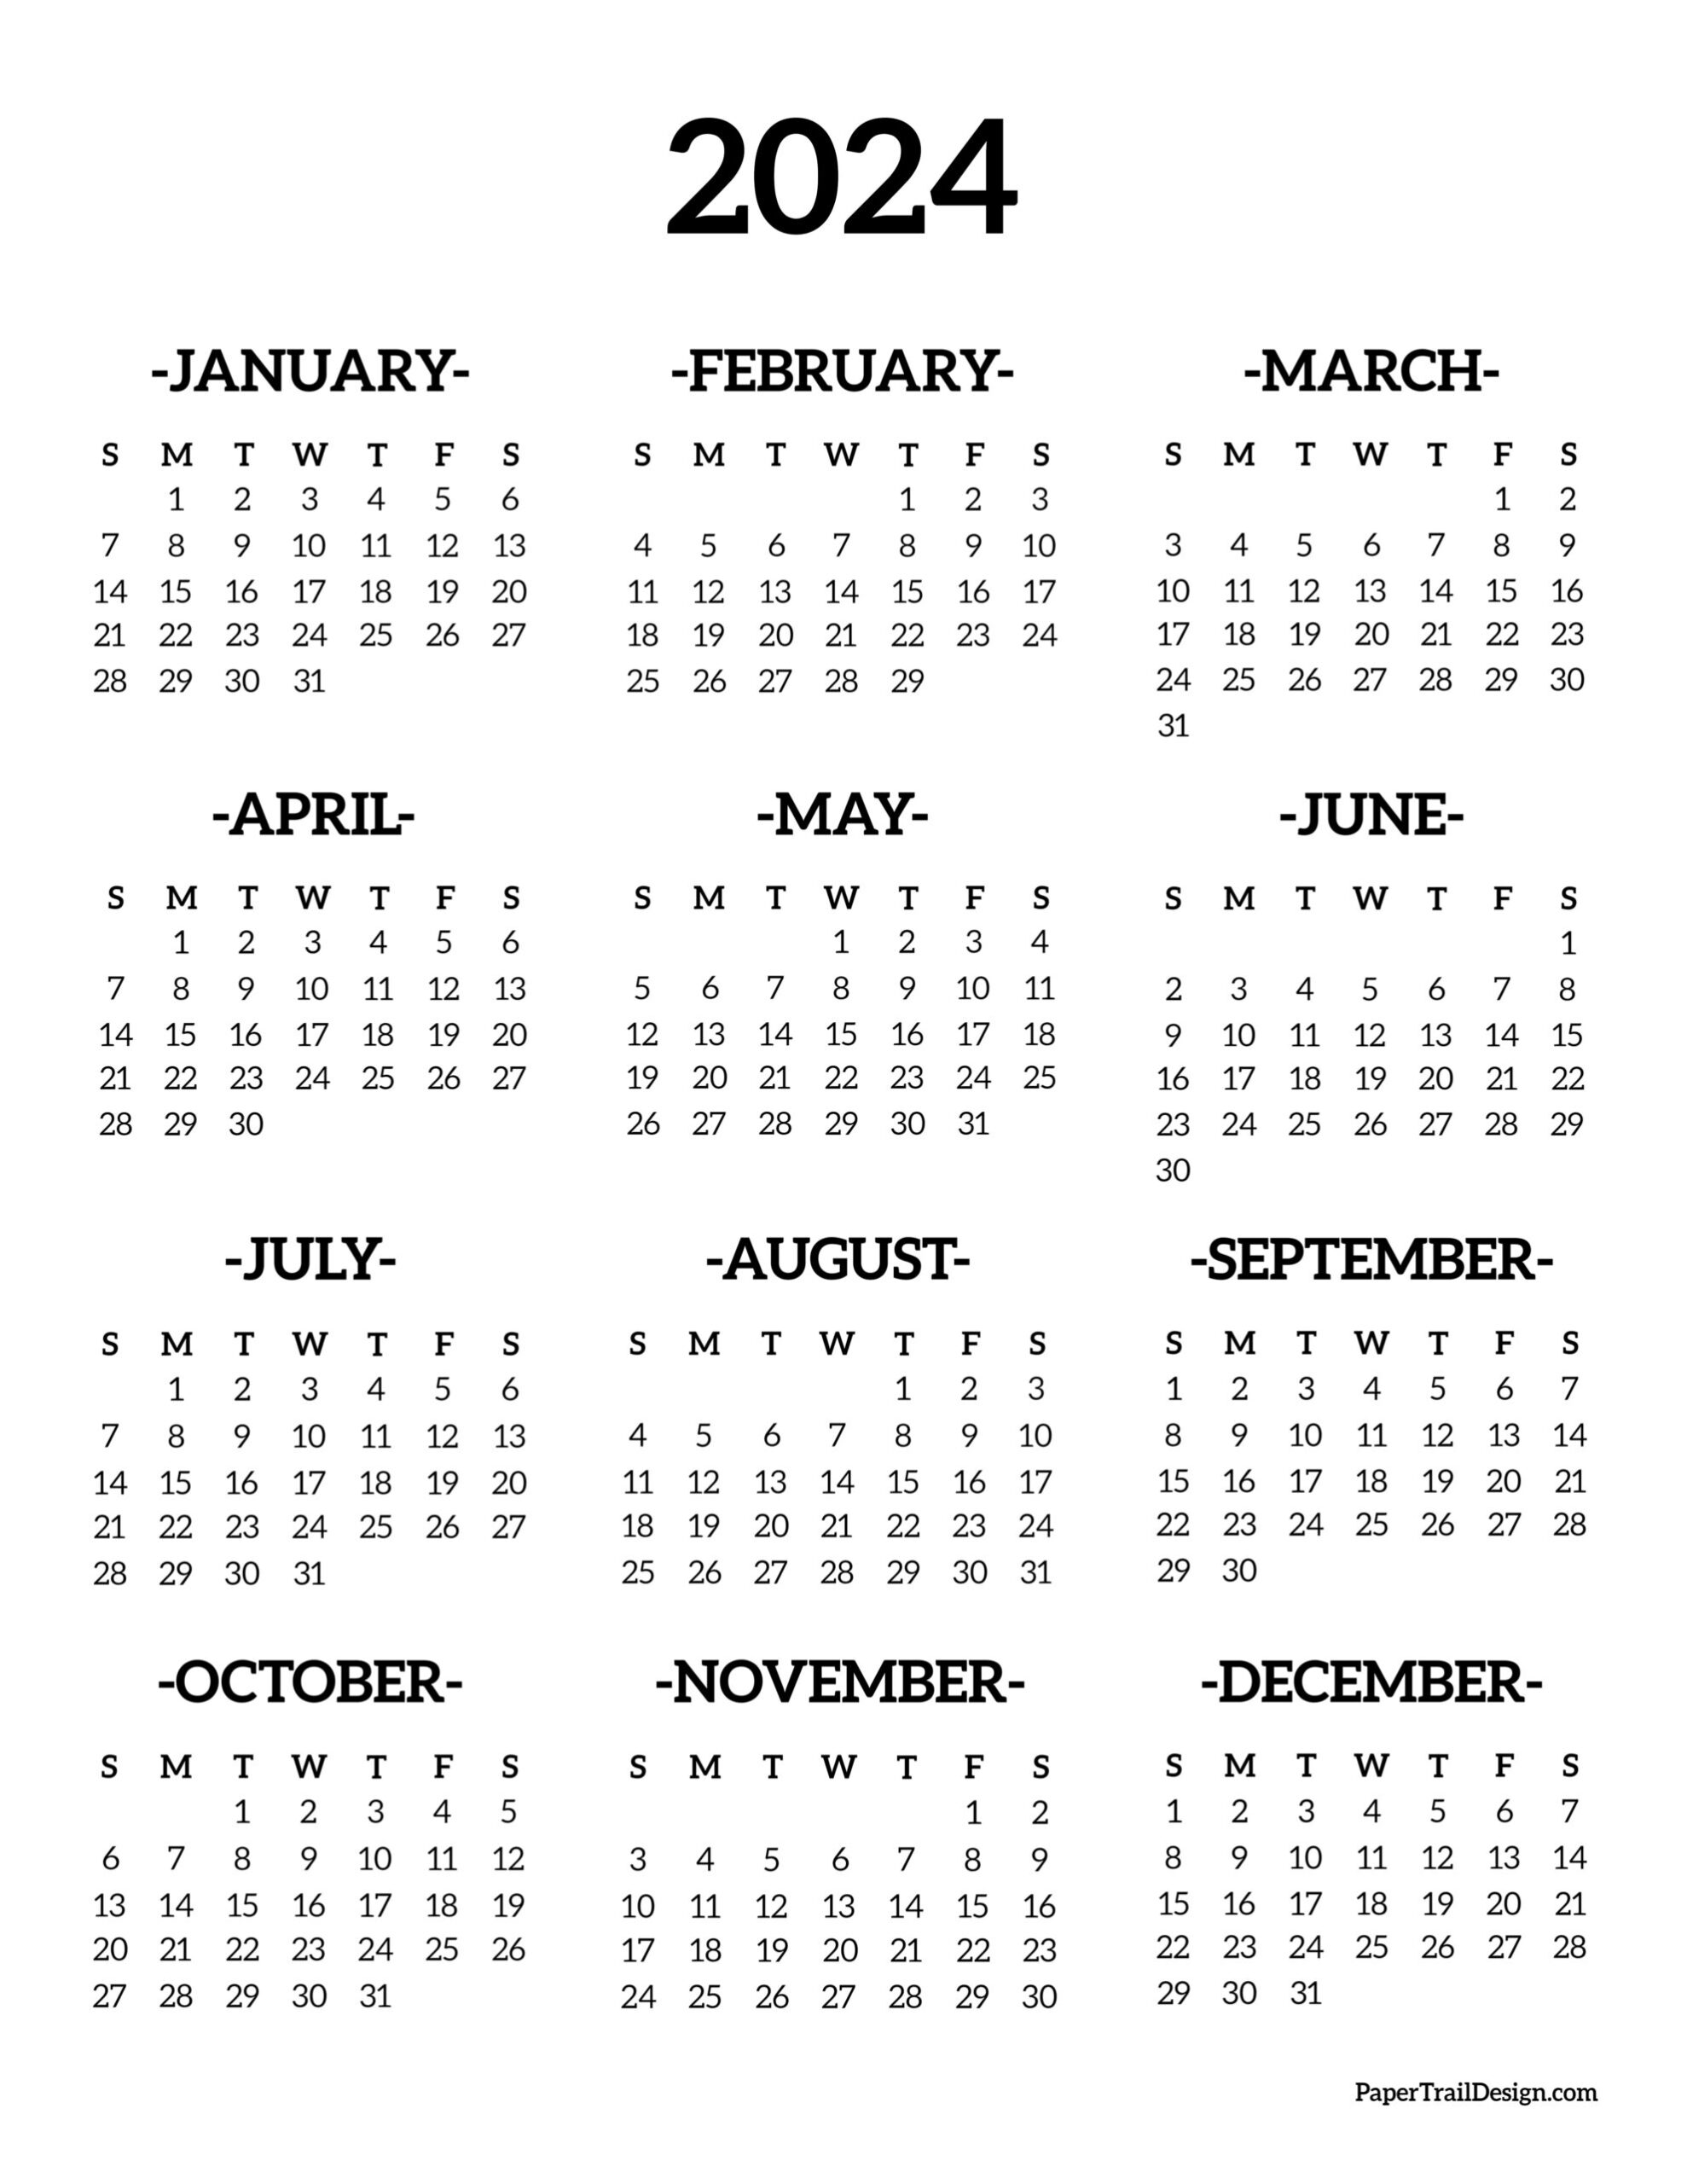 Calendar 2024 Printable One Page - Paper Trail Design for 2024 Printable Yearly Calendar